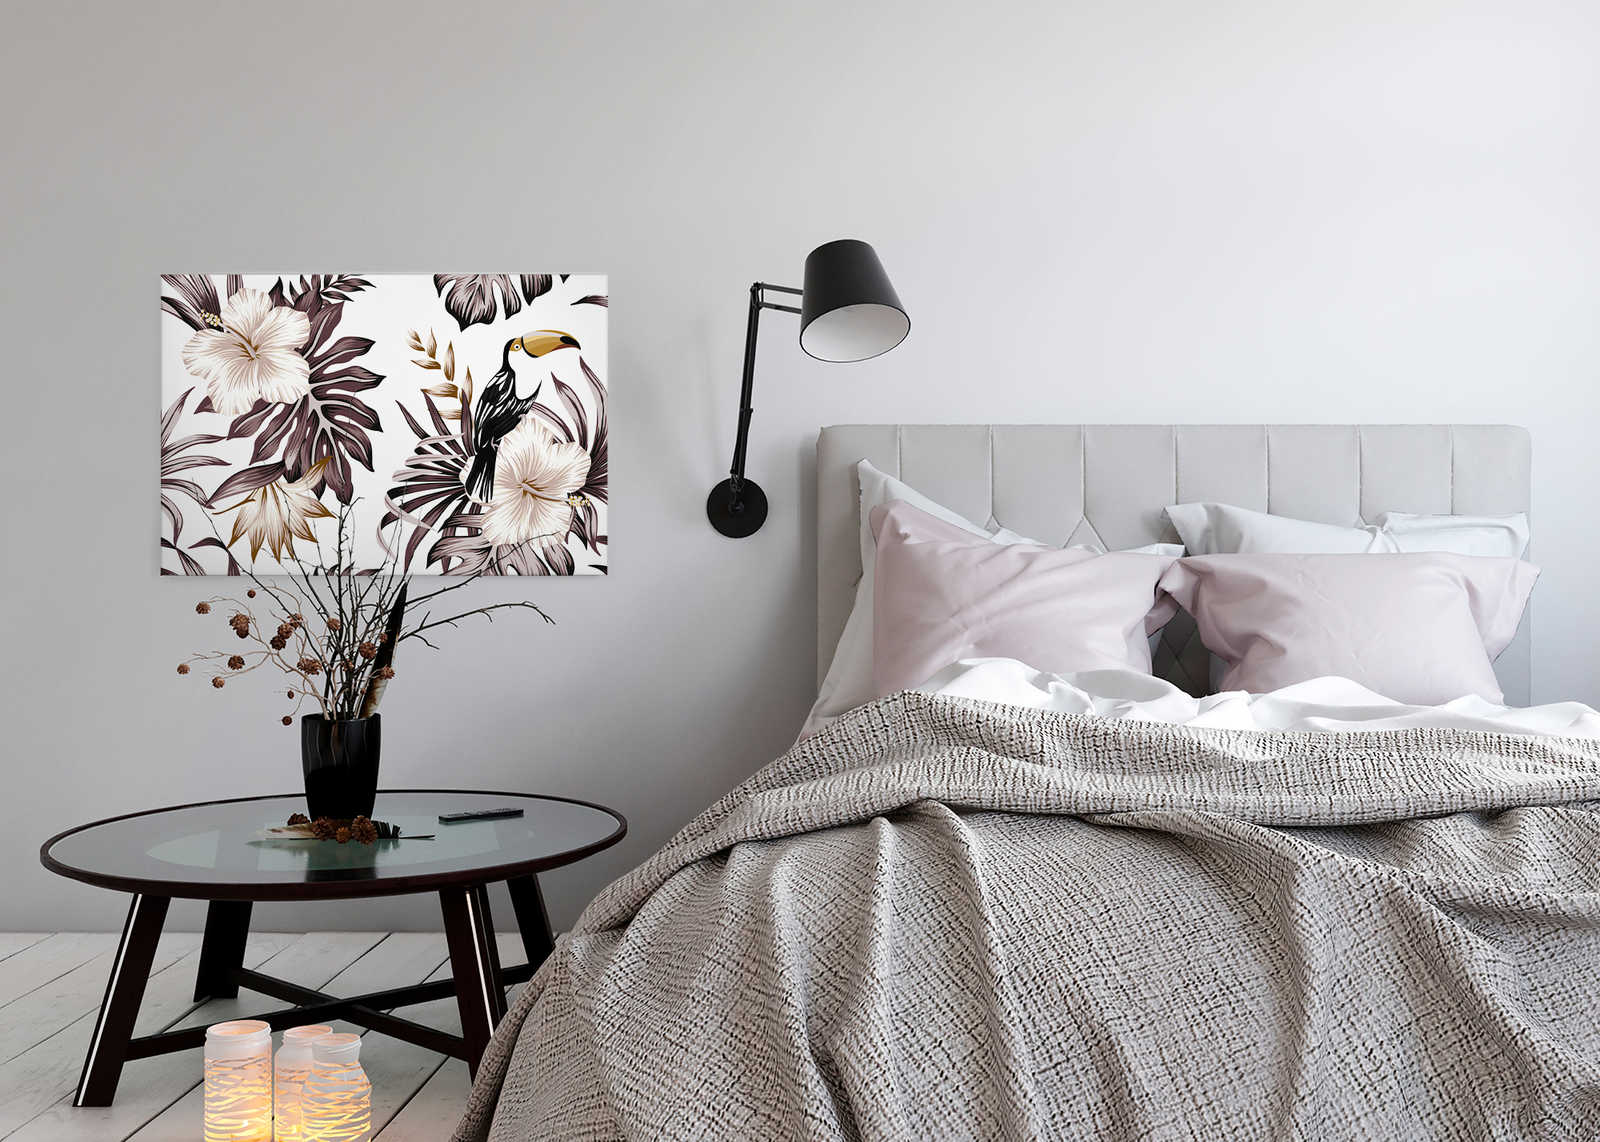             Canvas with jungle plants and pelican | Grey, White, Black - 0.90 m x 0.60 m
        